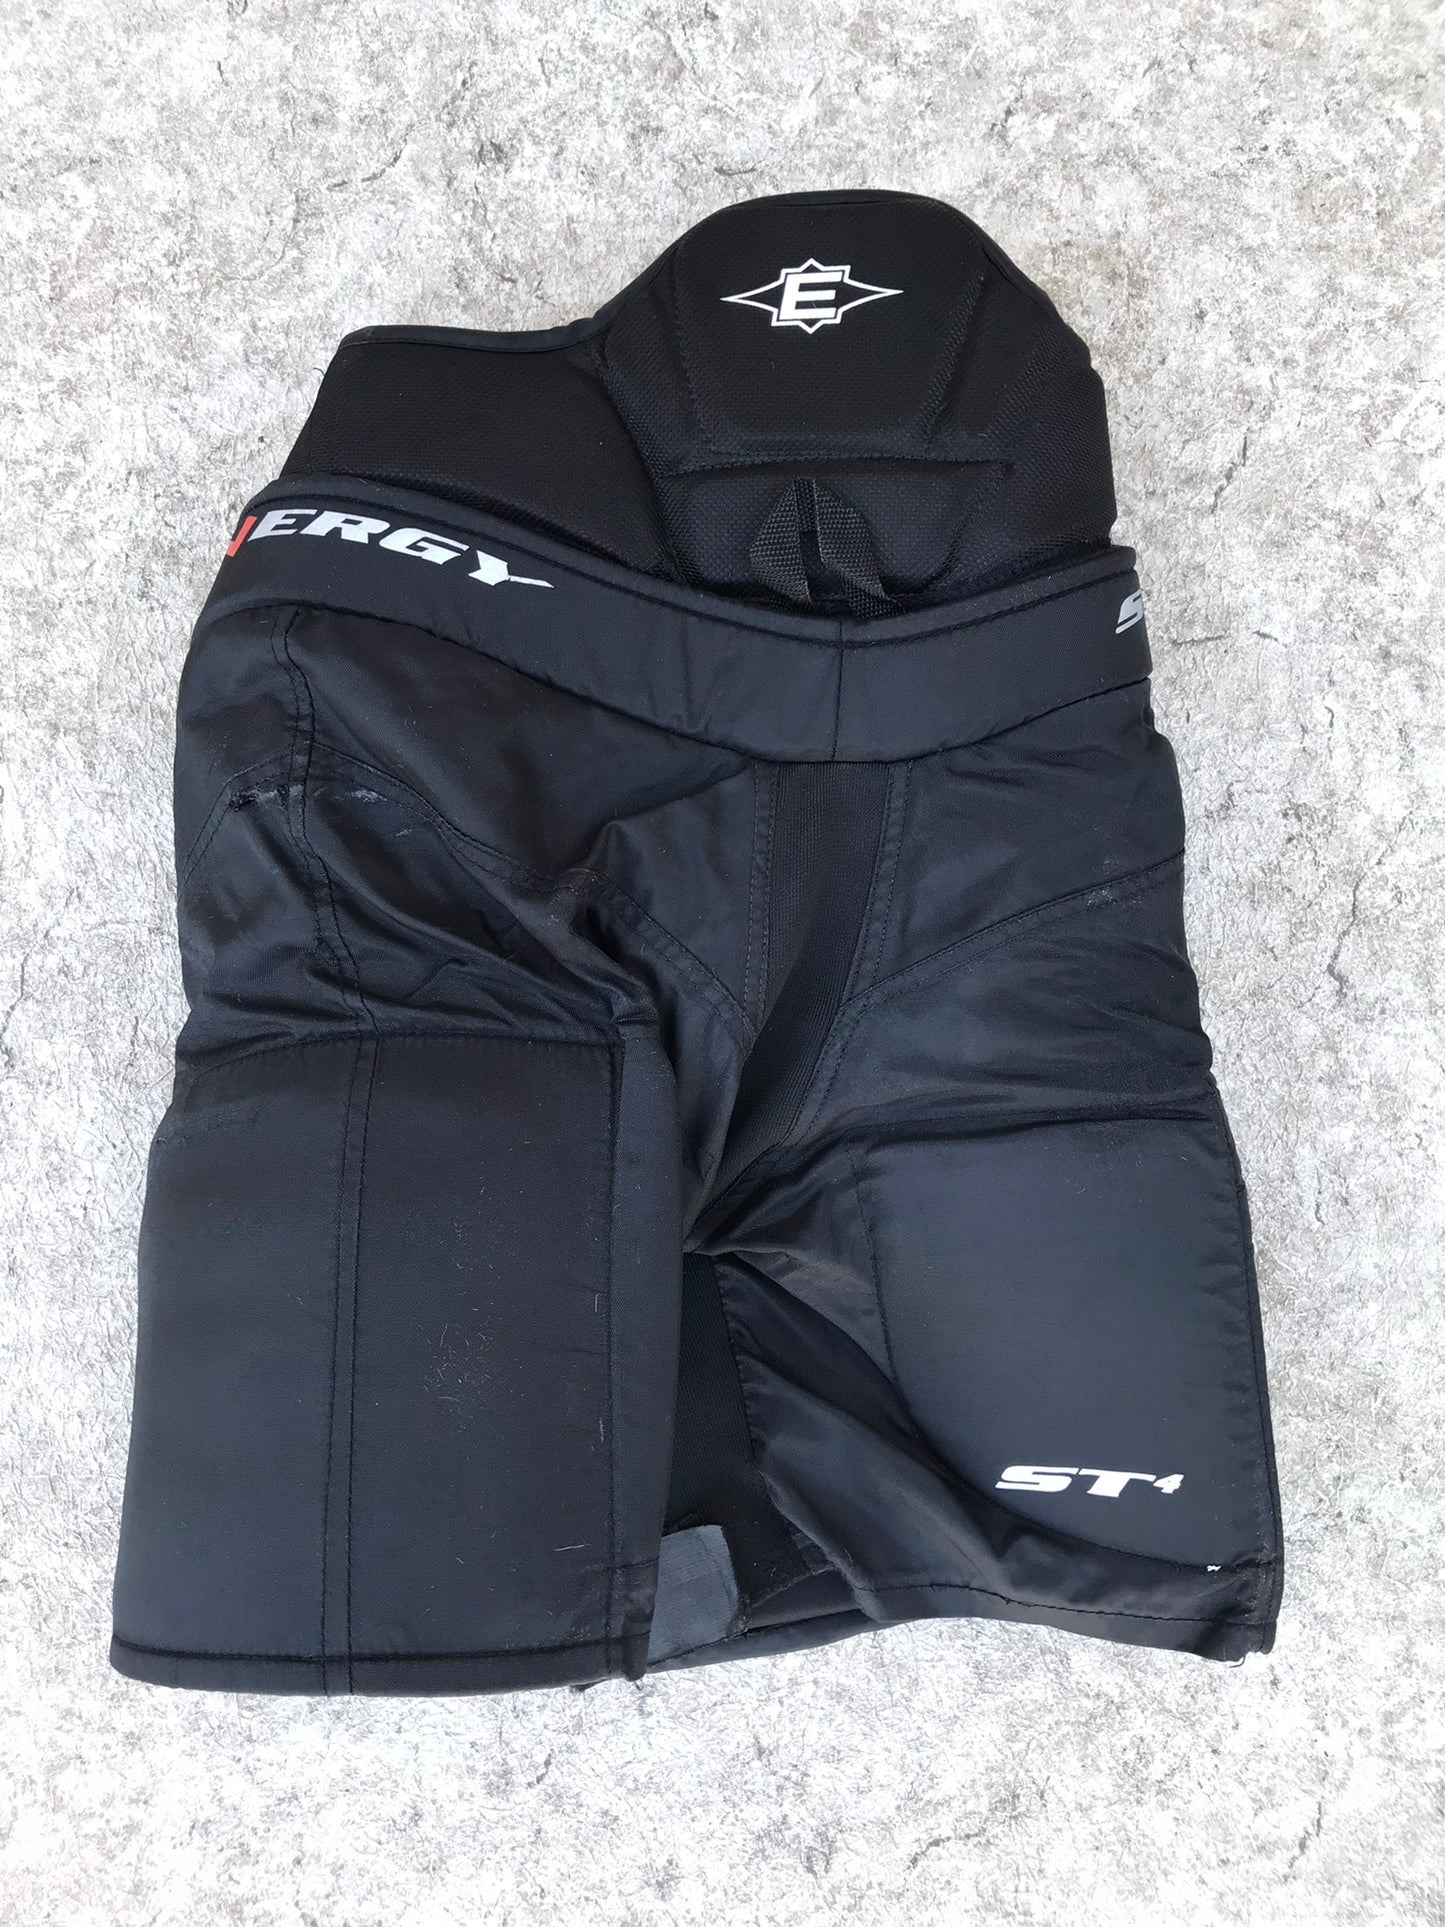 Hockey Pants Child Size Junior X Large Easton Black Red Excellent